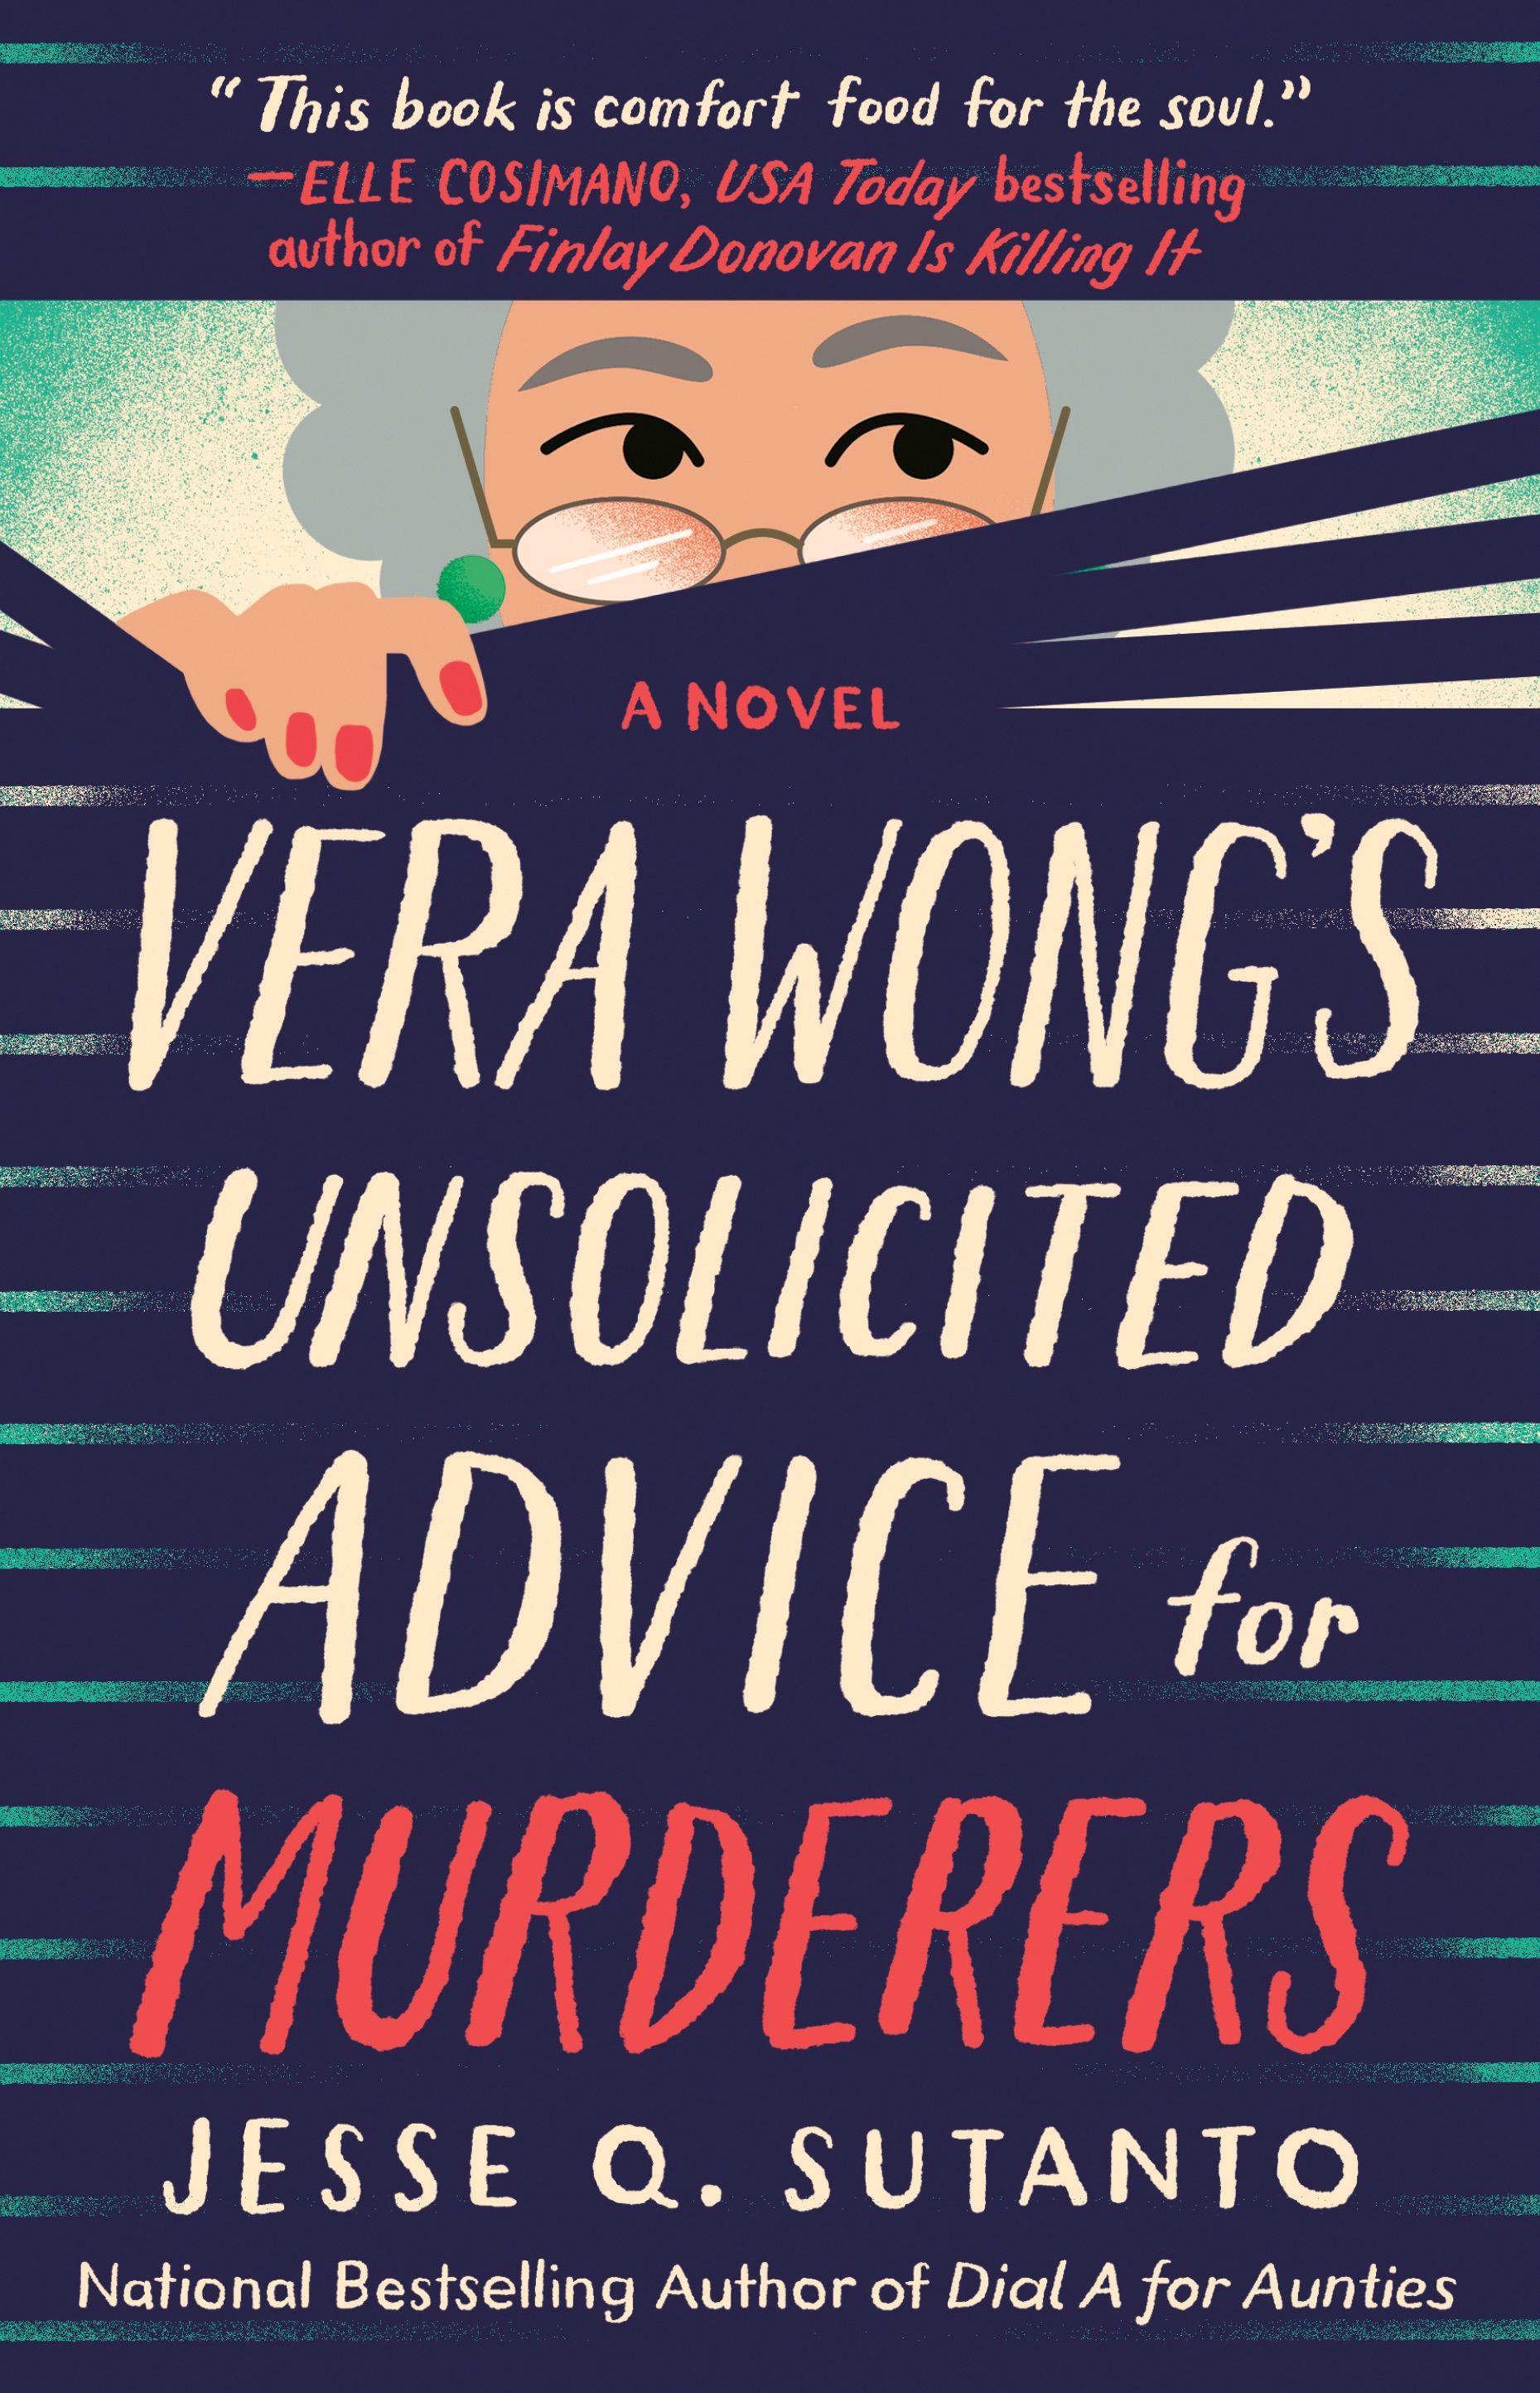 The cover of the new book, Vera Wang's Unsolicited Advice for Murderers, by author Jesse Q. Sutanto.